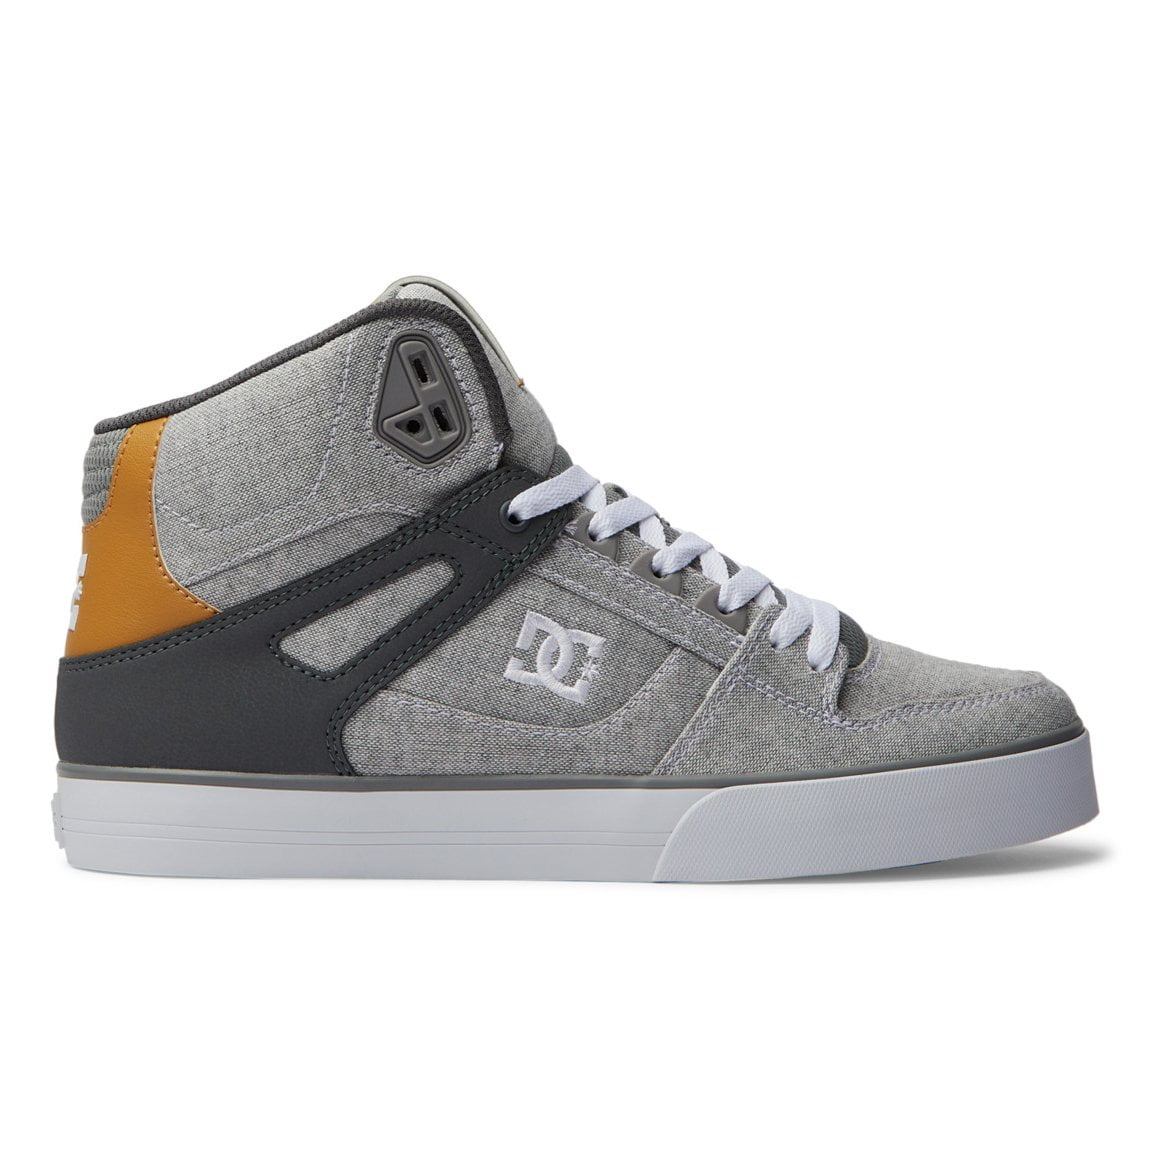 DC Shoes Mens Pure High-Top Shoes Grey/Grey/White - ADYS400043-XSSW ...